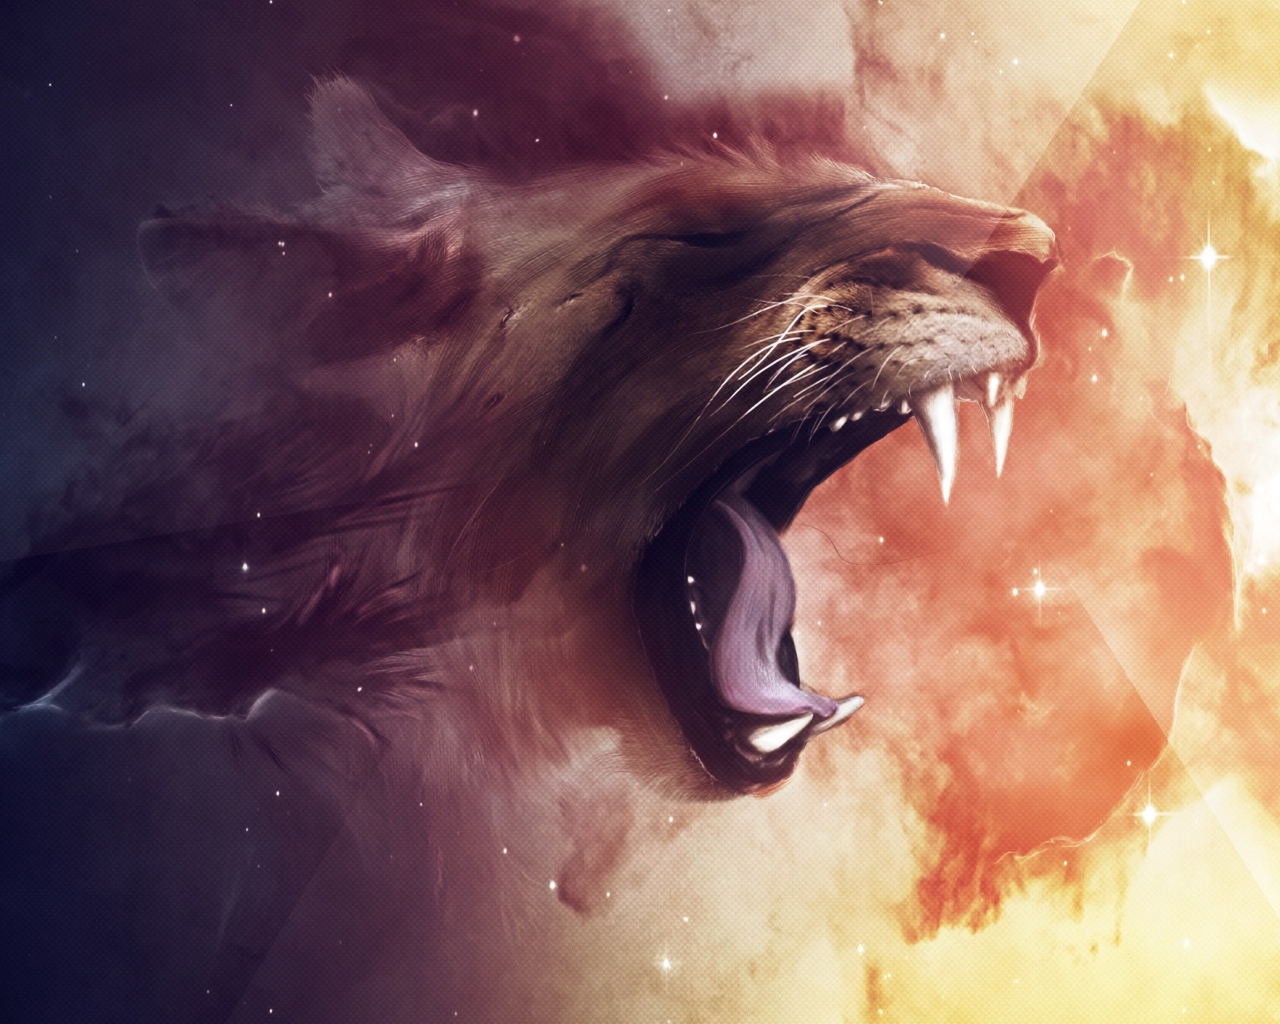 Painted lion yawns on a fiery background